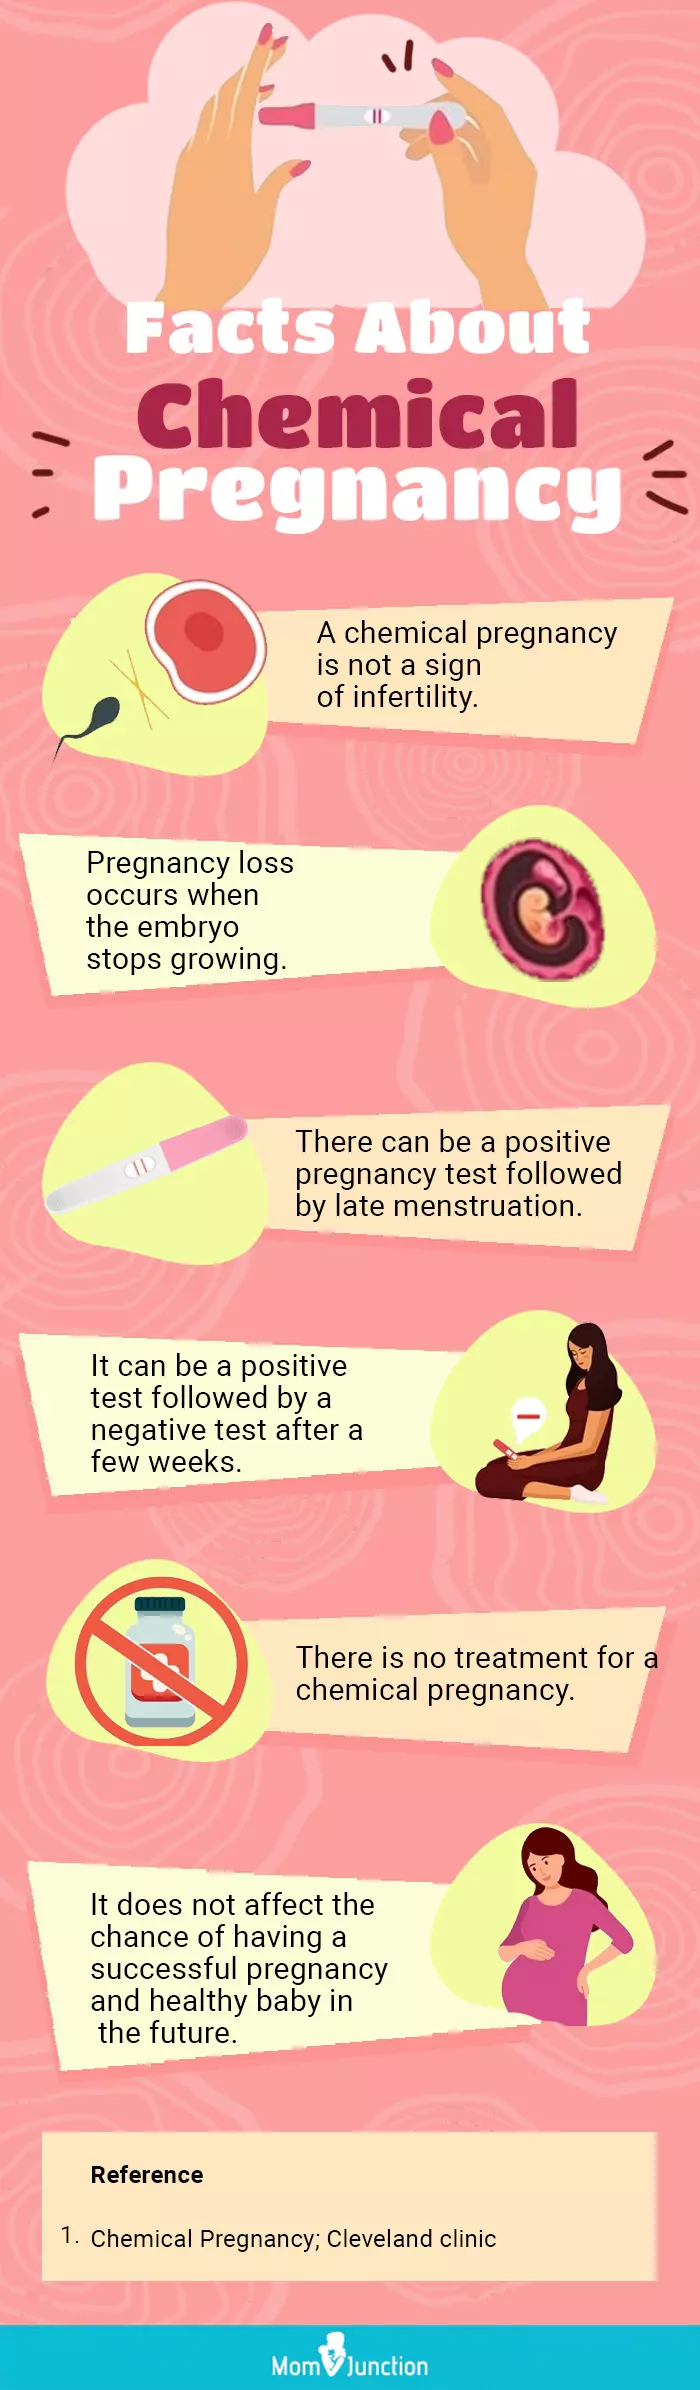 facts about a chemical pregnancy (infographic)